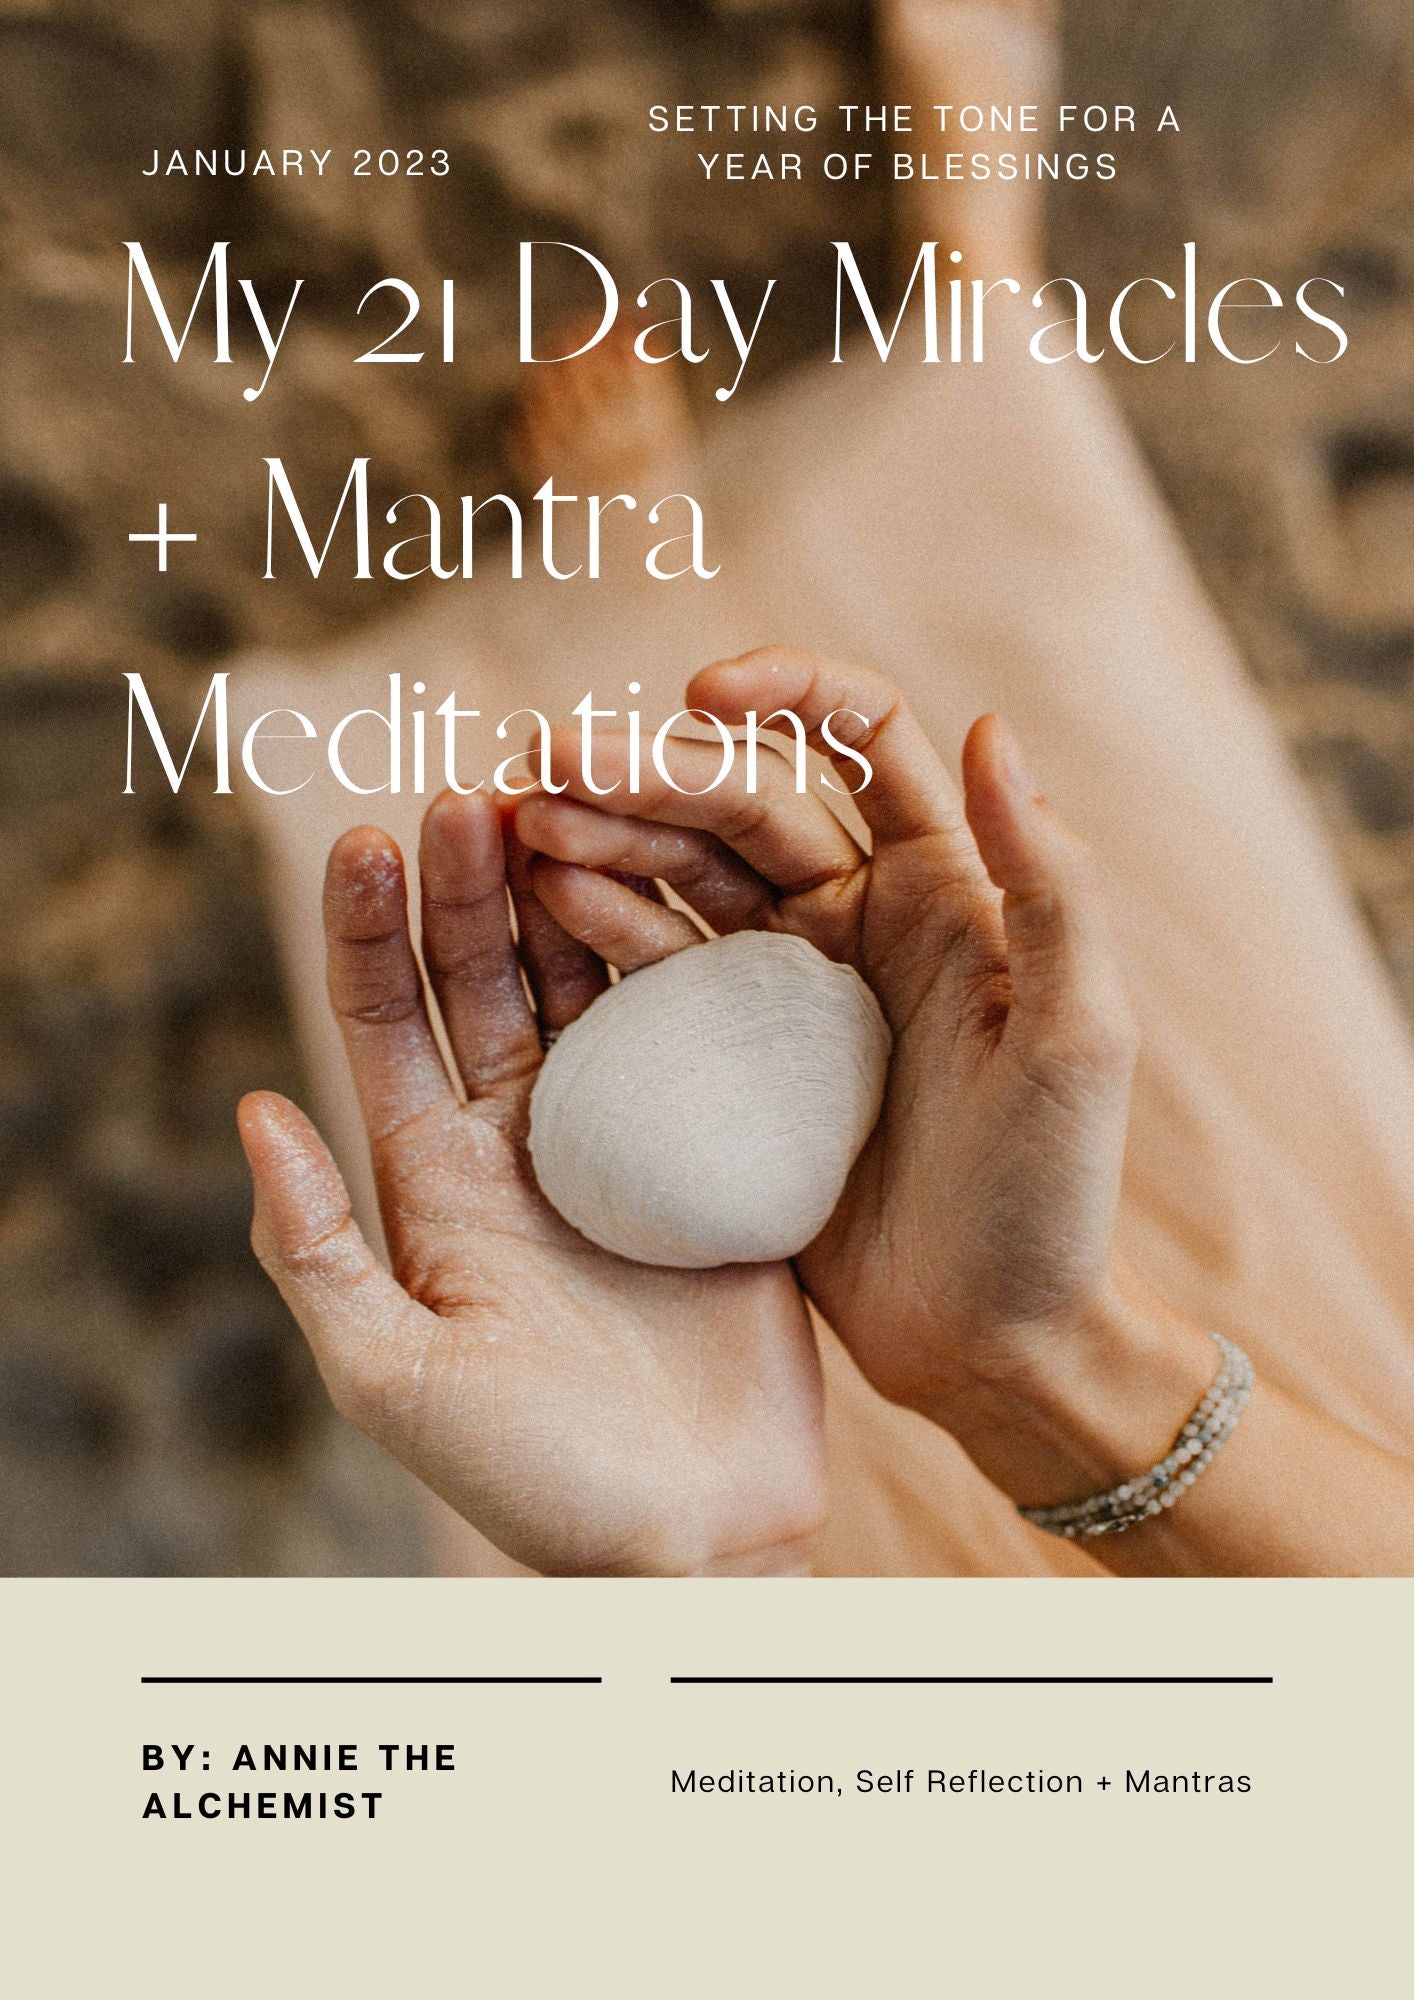 How Mantras Can Help Your Meditation